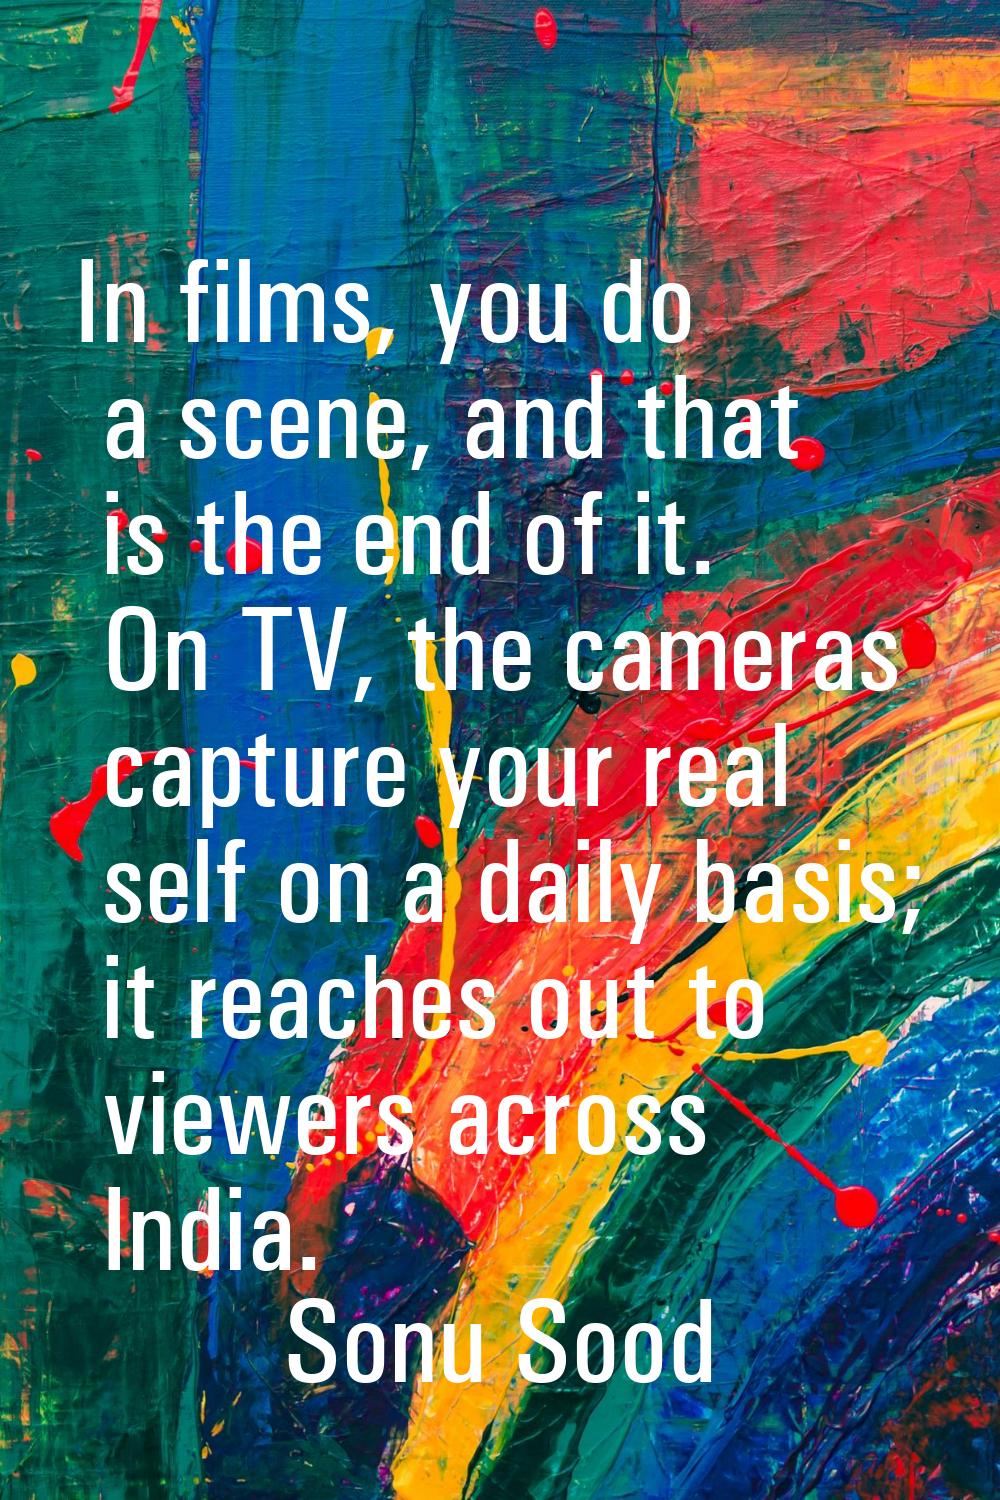 In films, you do a scene, and that is the end of it. On TV, the cameras capture your real self on a